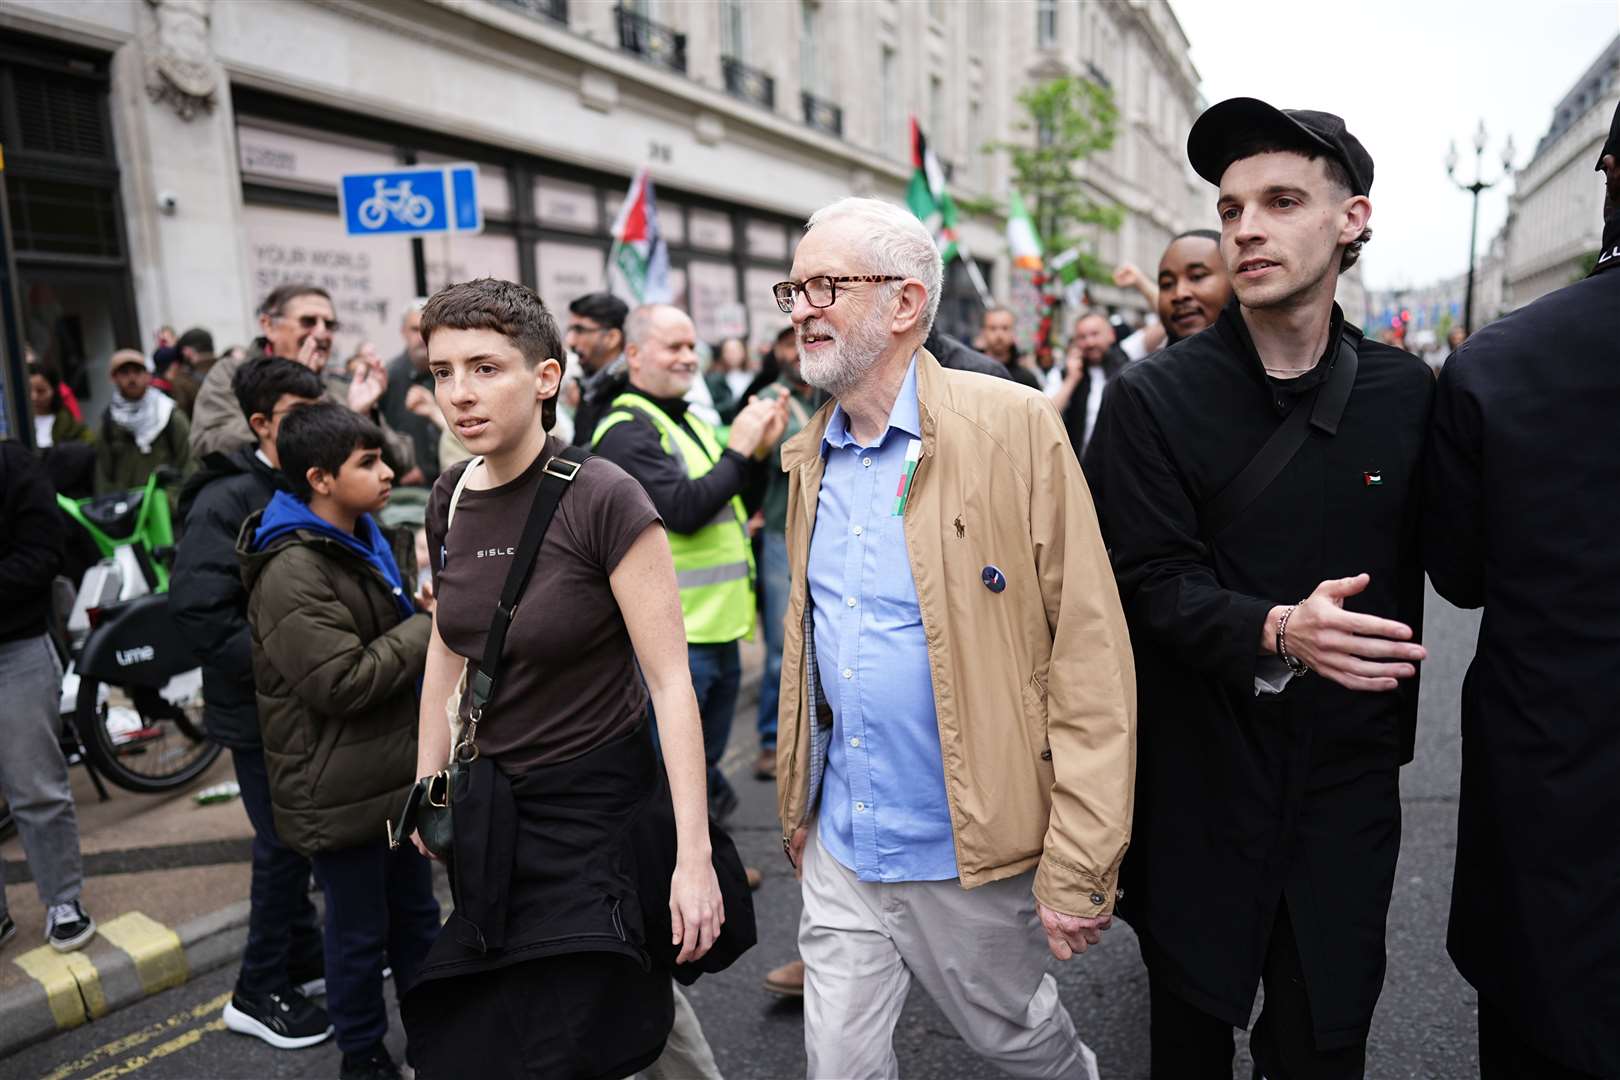 Former Labour Party leader Jeremy Corbyn takes part in the demonstration (Aaron Chown/PA)